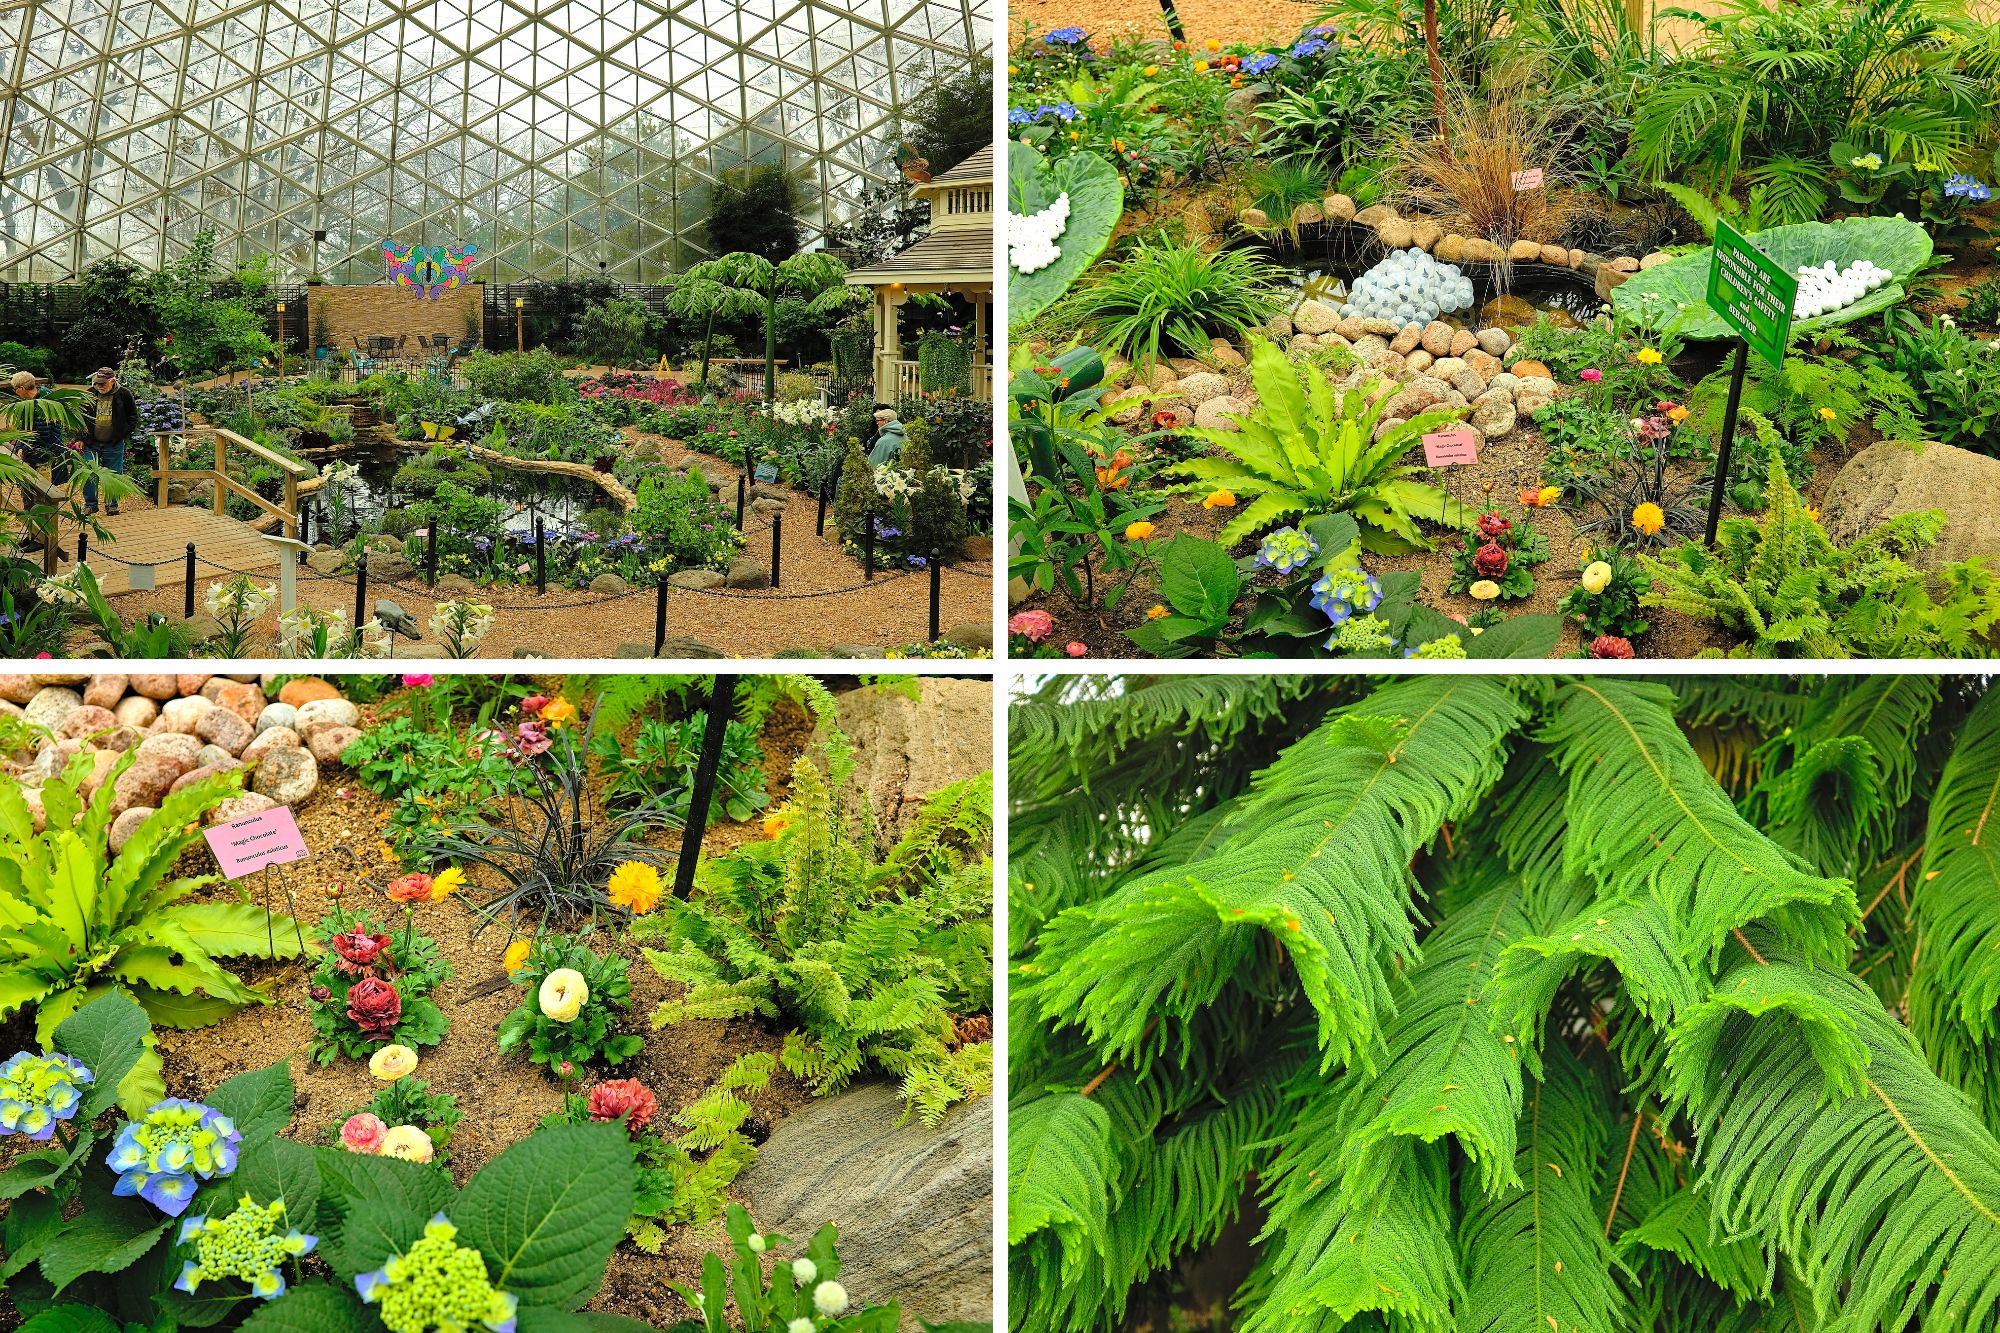 Scenes inside the Mitchell Park Show Dome 